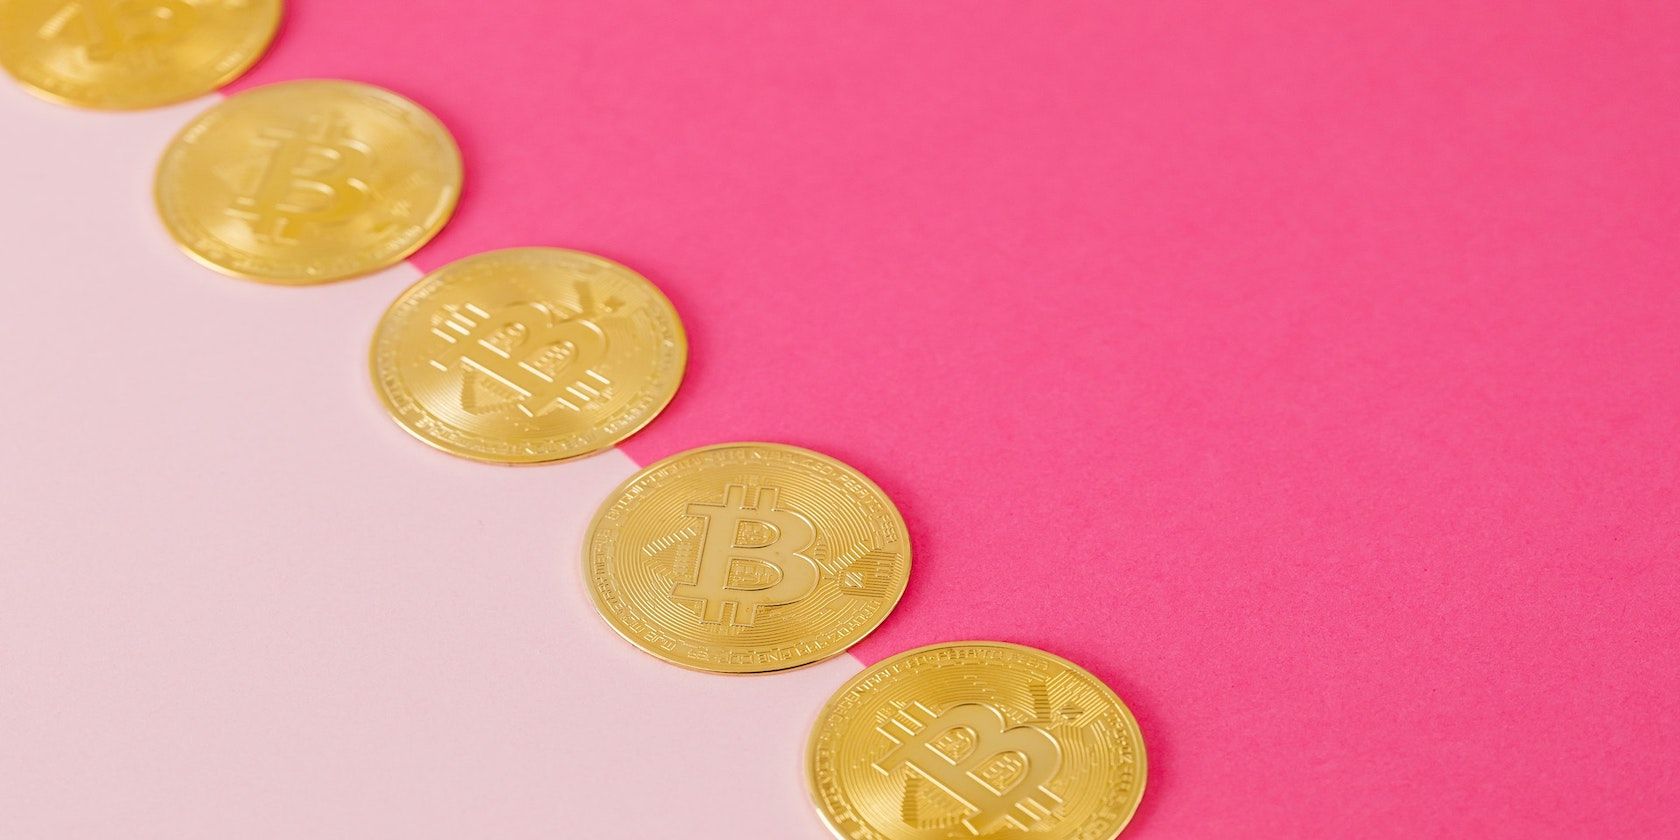 Bitcoins on Pink Surface